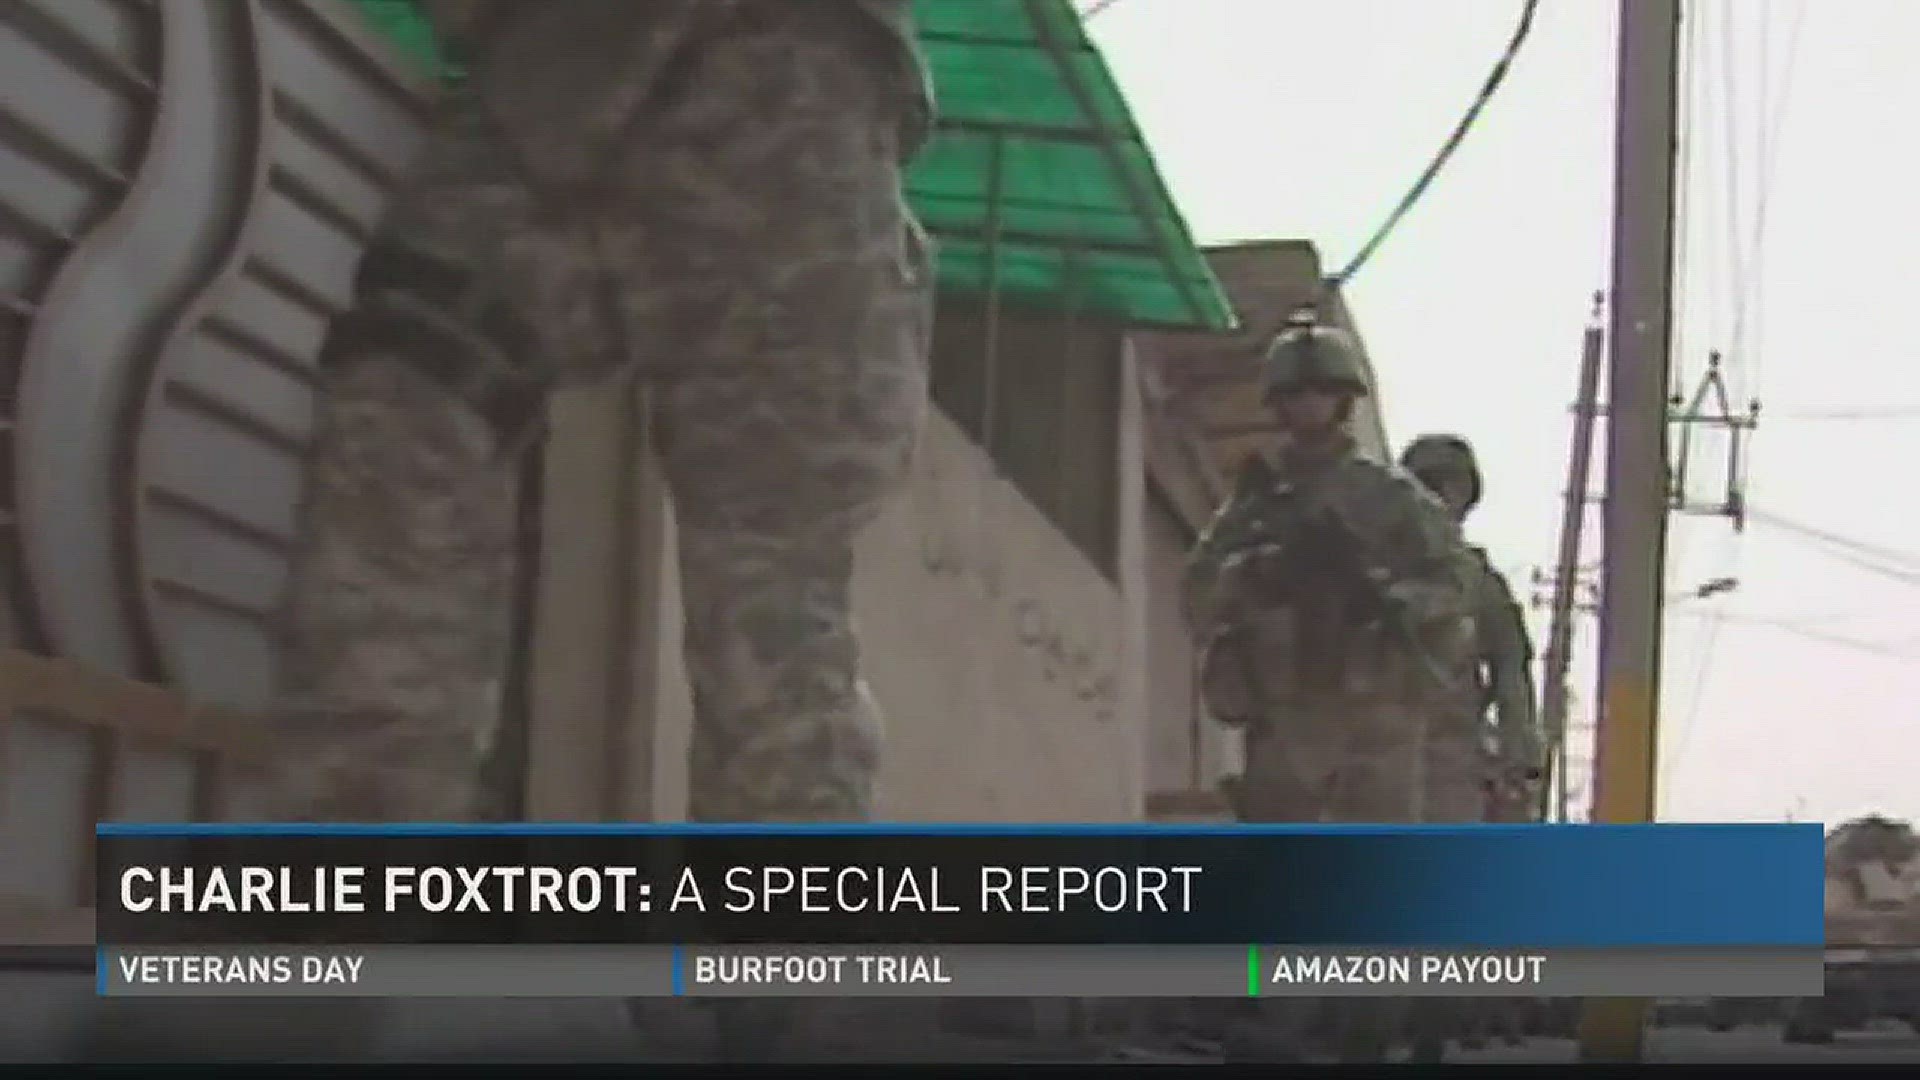 Charlie Foxtrot: A special report